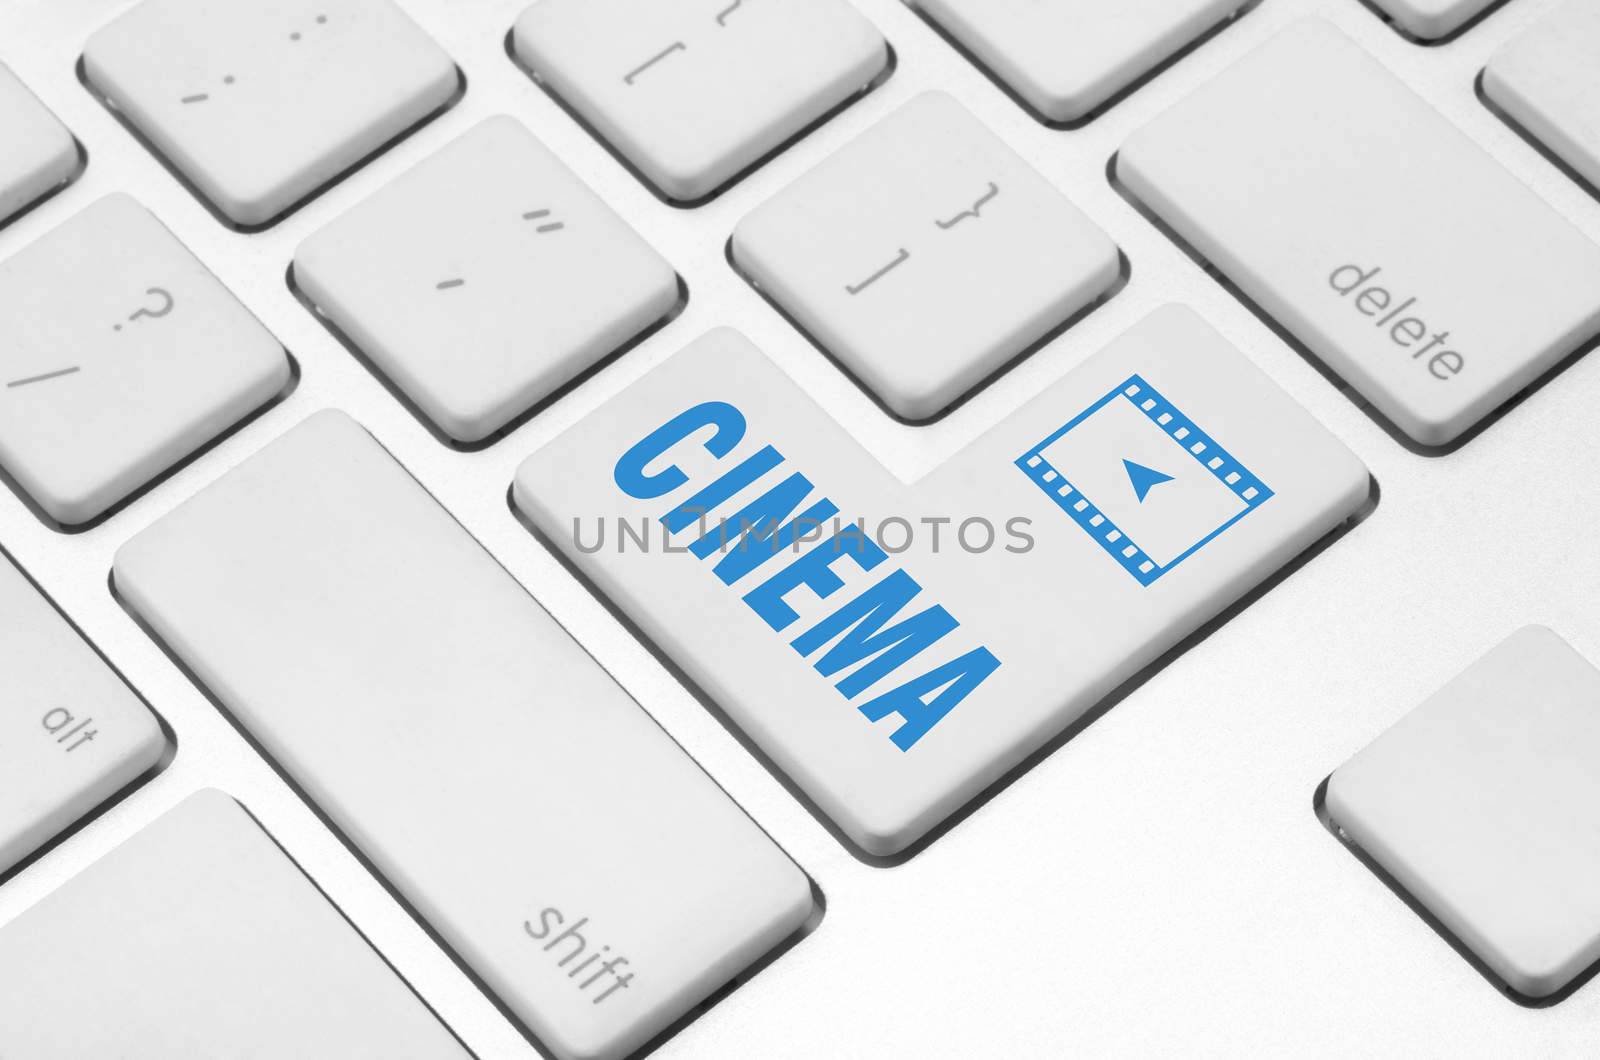 Business concept: Cinema key on the computer keyboard